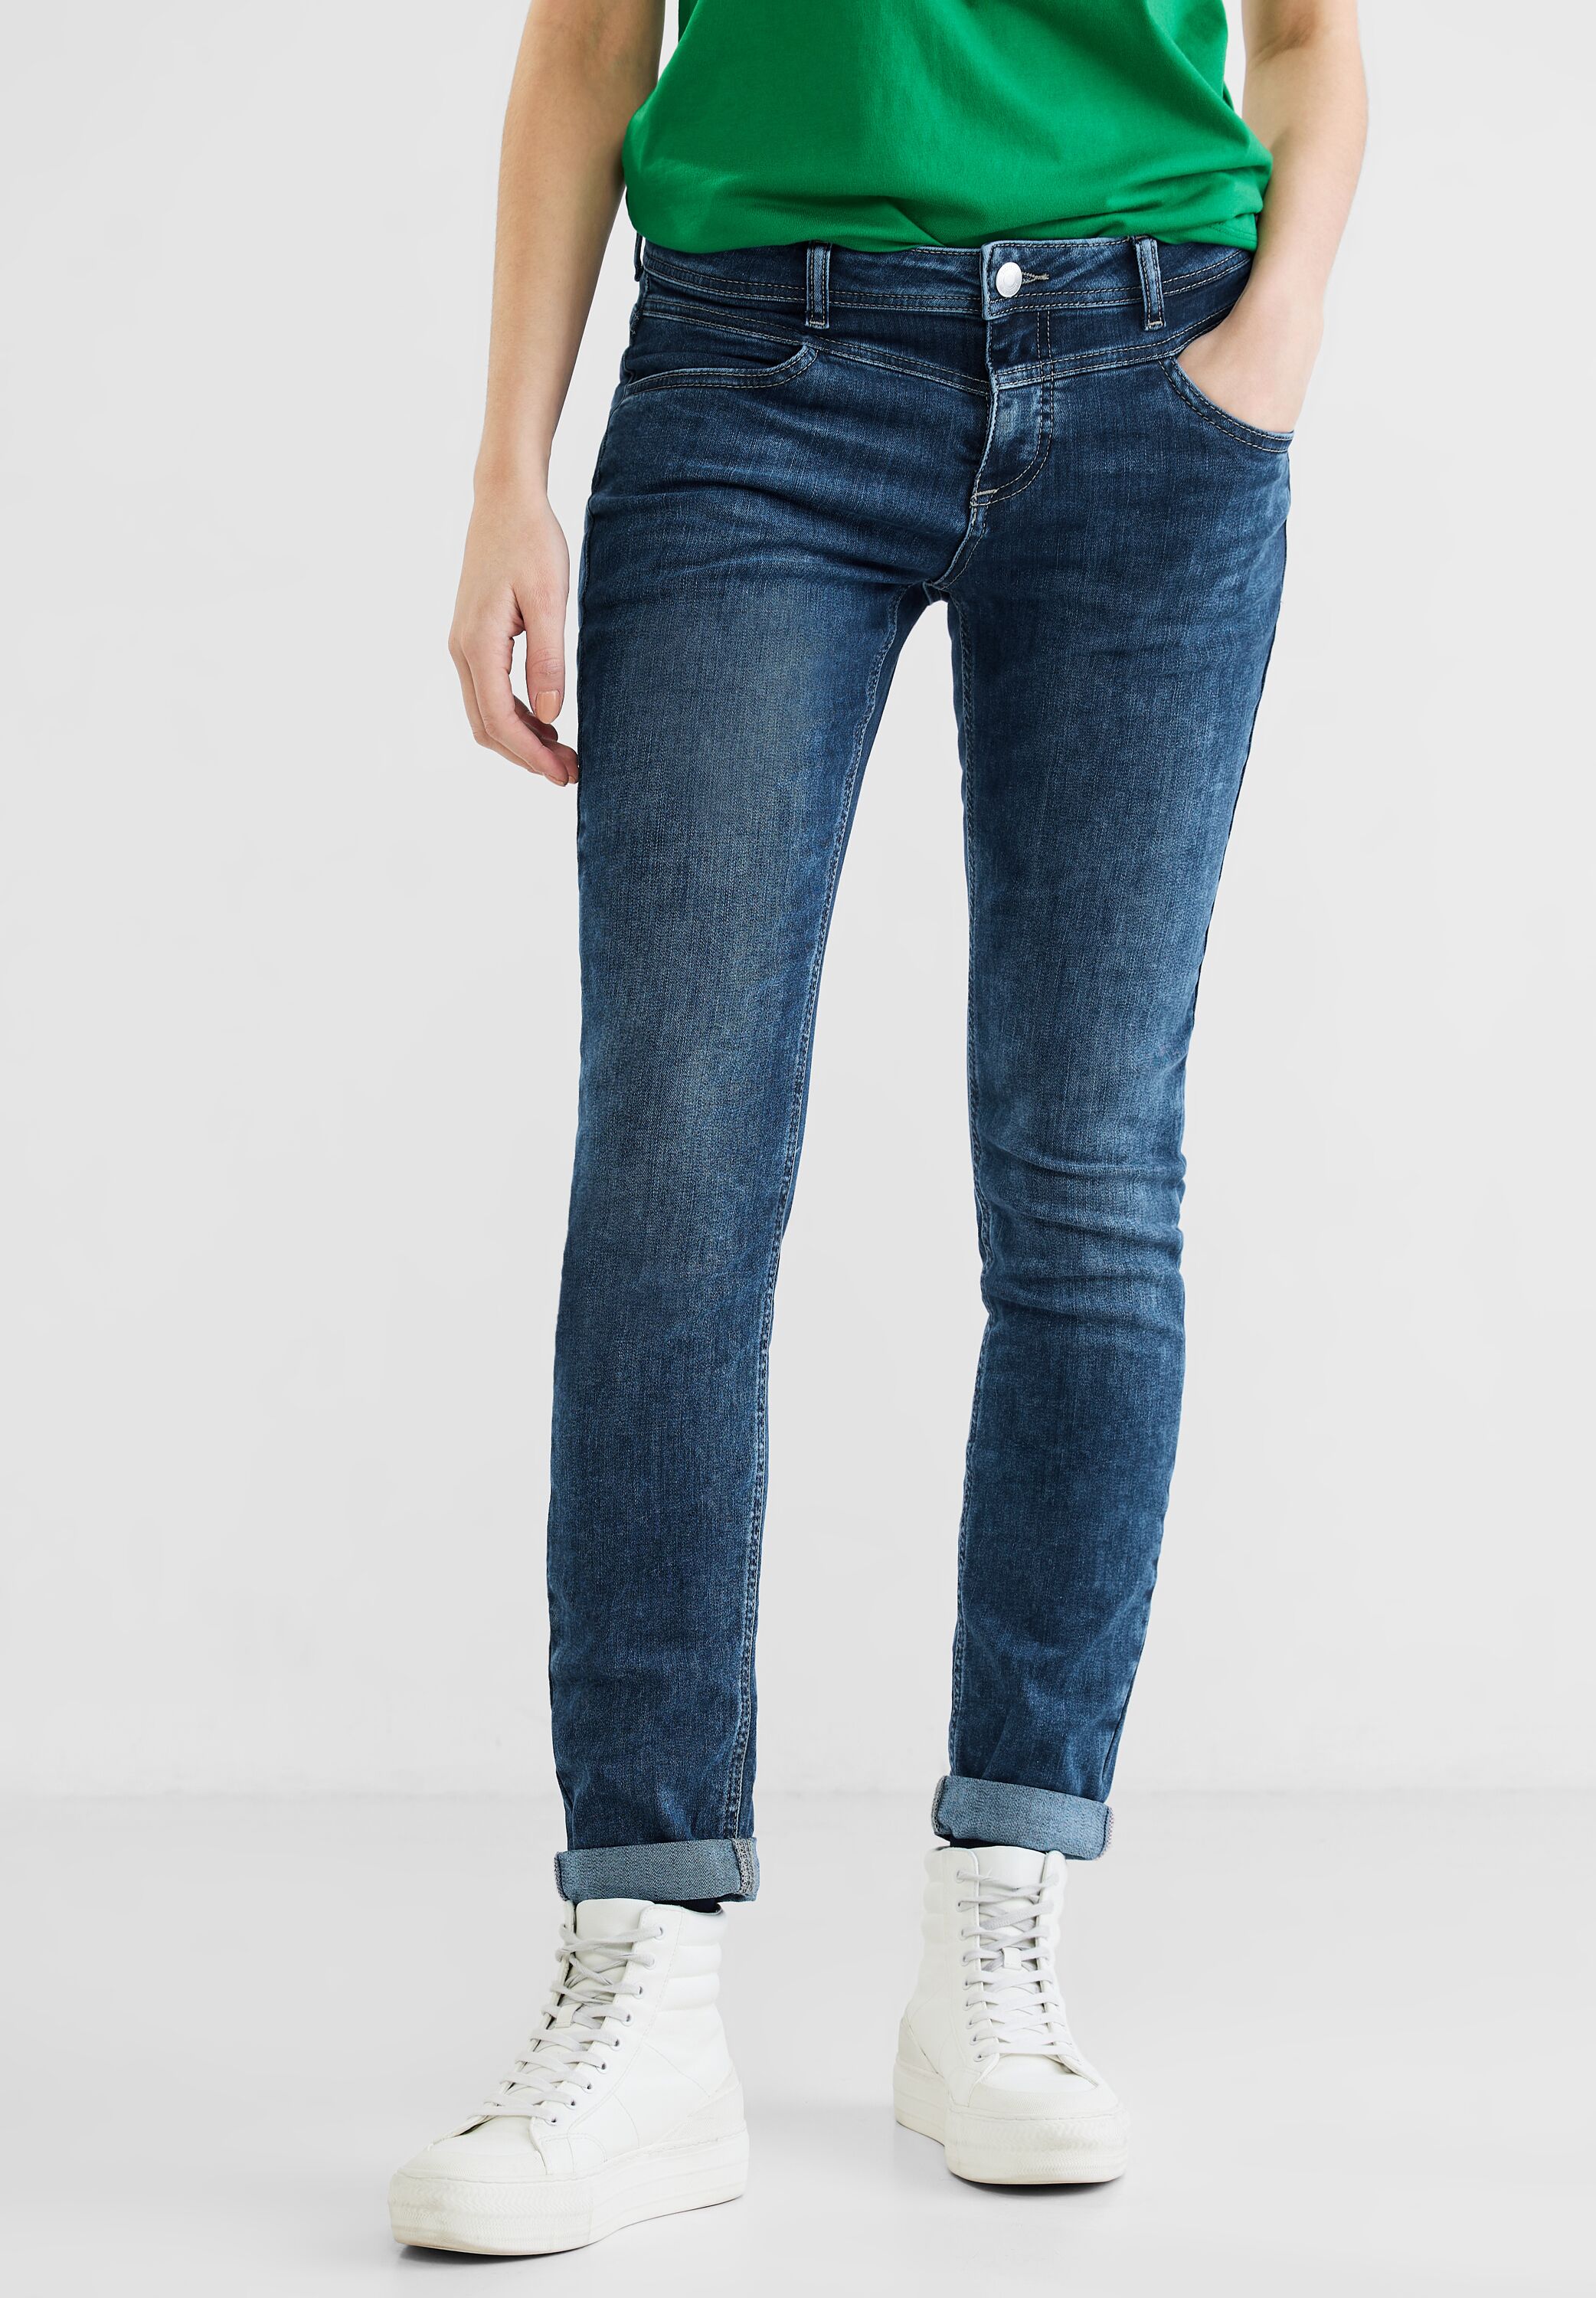 Street One Jeans Jane in Deep Mode Wash CONCEPT A376060-14821-32 - Indigo Used